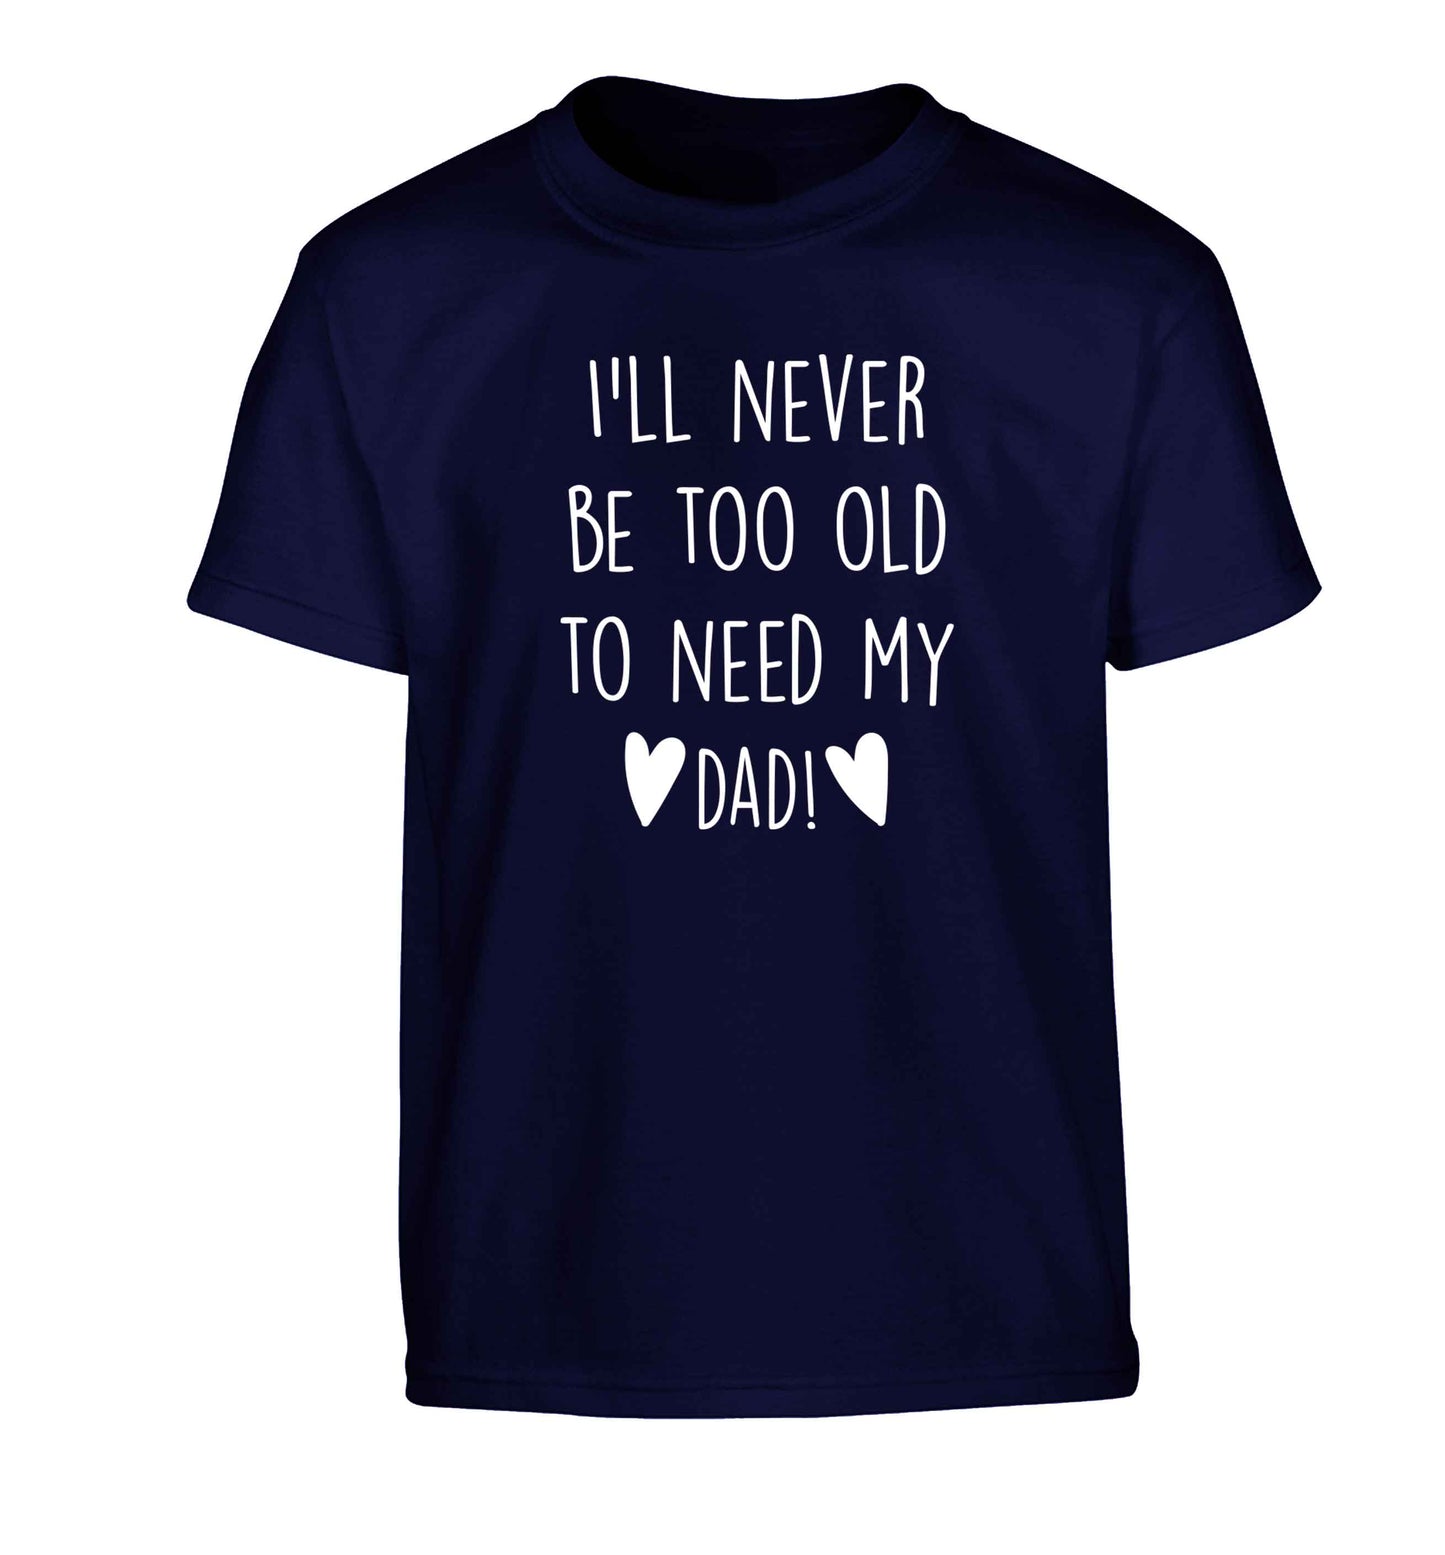 I'll never be too old to need my dad Children's navy Tshirt 12-13 Years